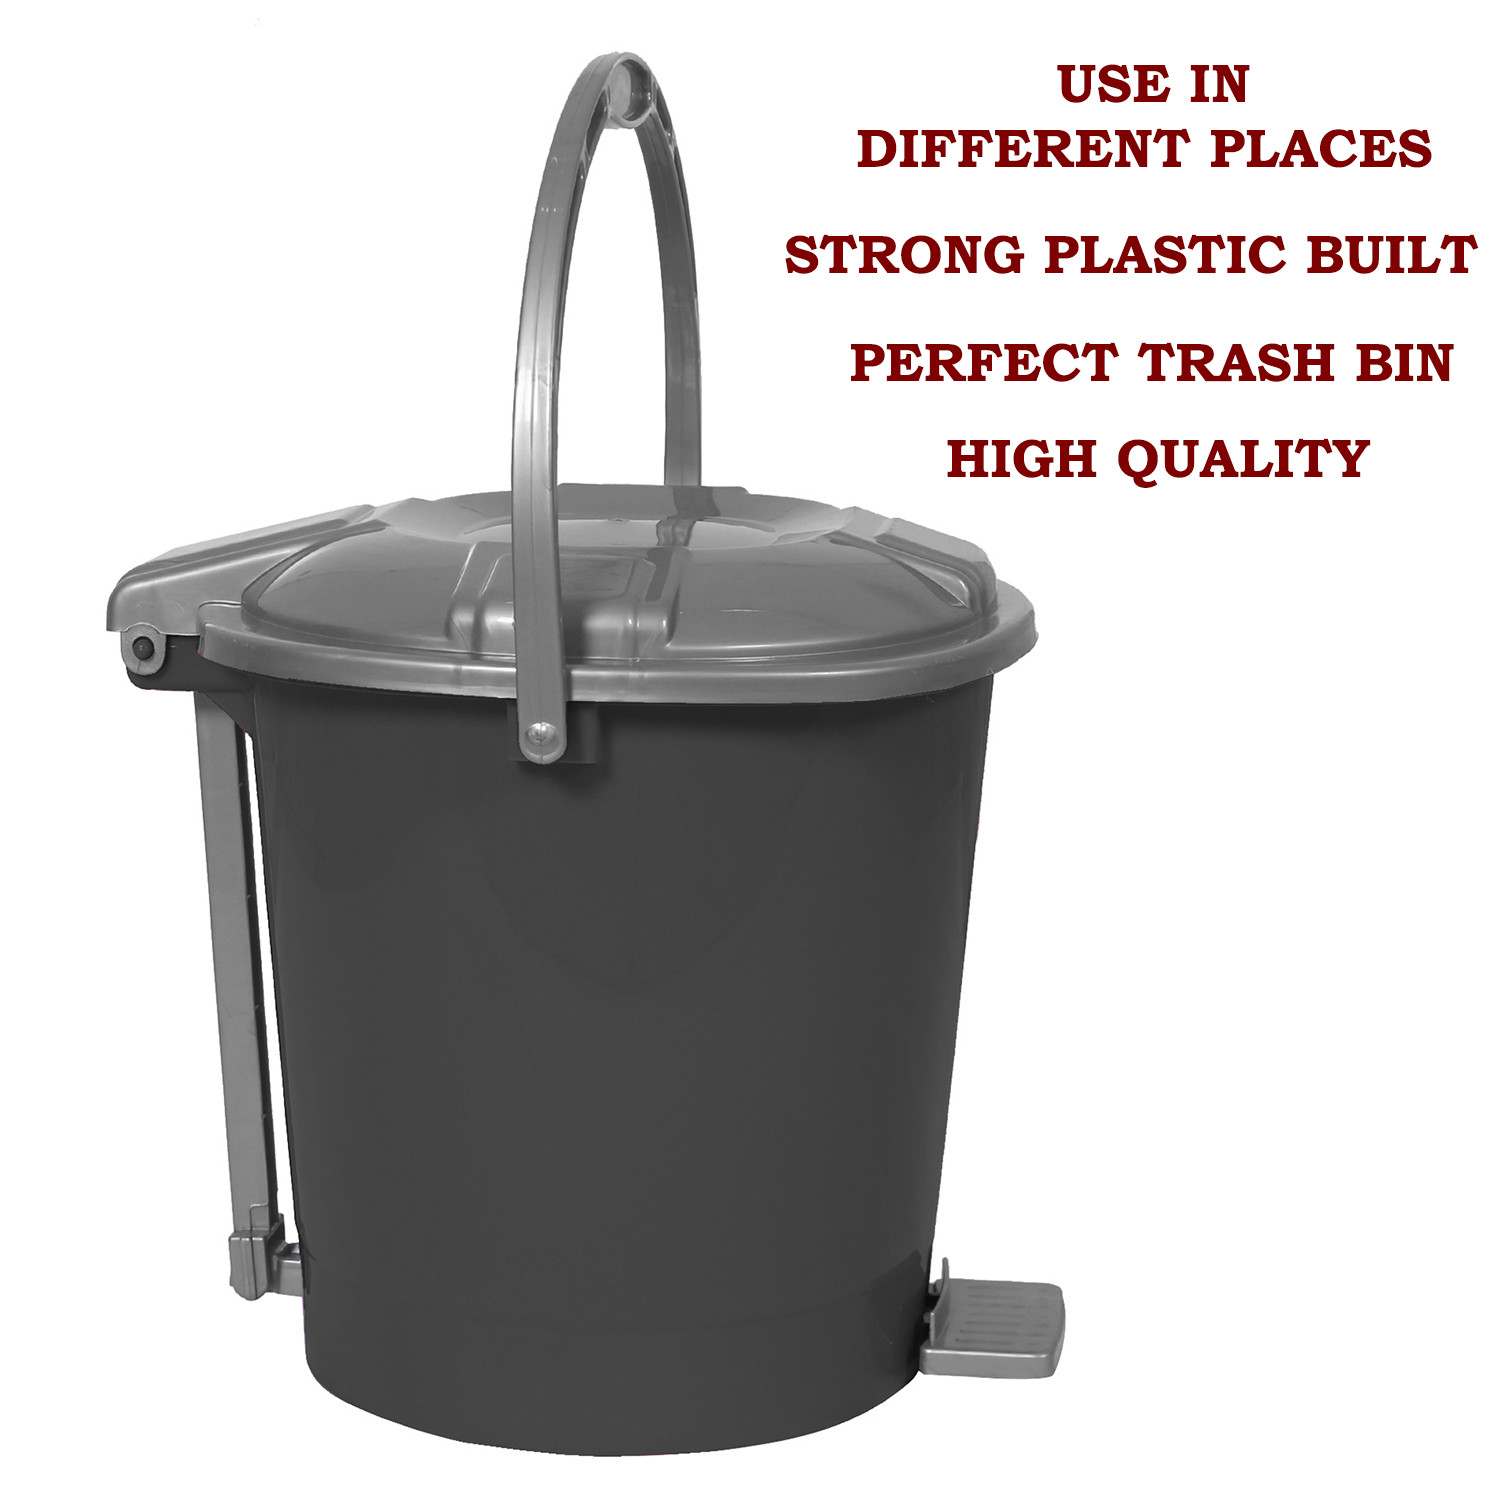 Kuber Industries Durable Plastic Pedal Dustbin|Waste Bin|Trash Can For Kitchen & Home With Handle,7 Litre,Pack of 2 (Gray & Red)